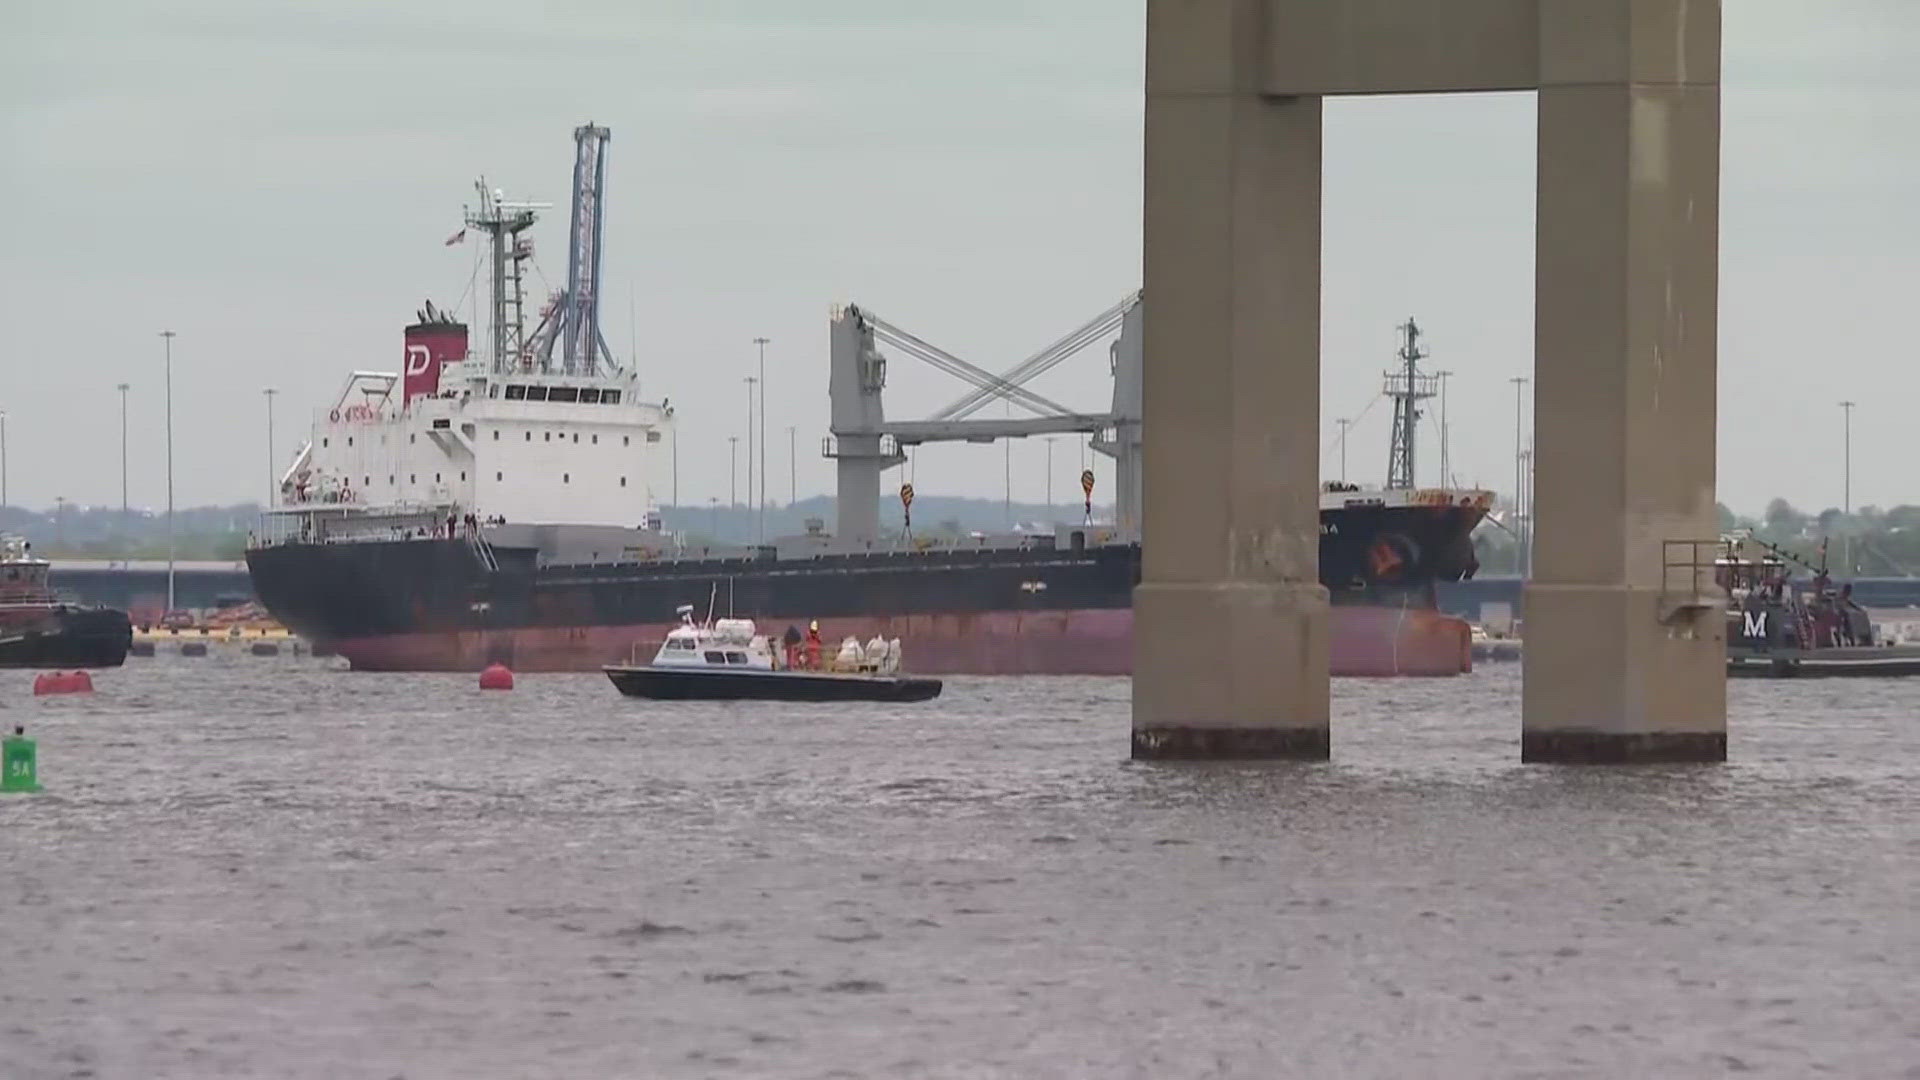 For a few days, ships have a way to leave after the Francis Scott Key Bridge Collapsed into the Chesapeake Bay when a ship crashed into it.